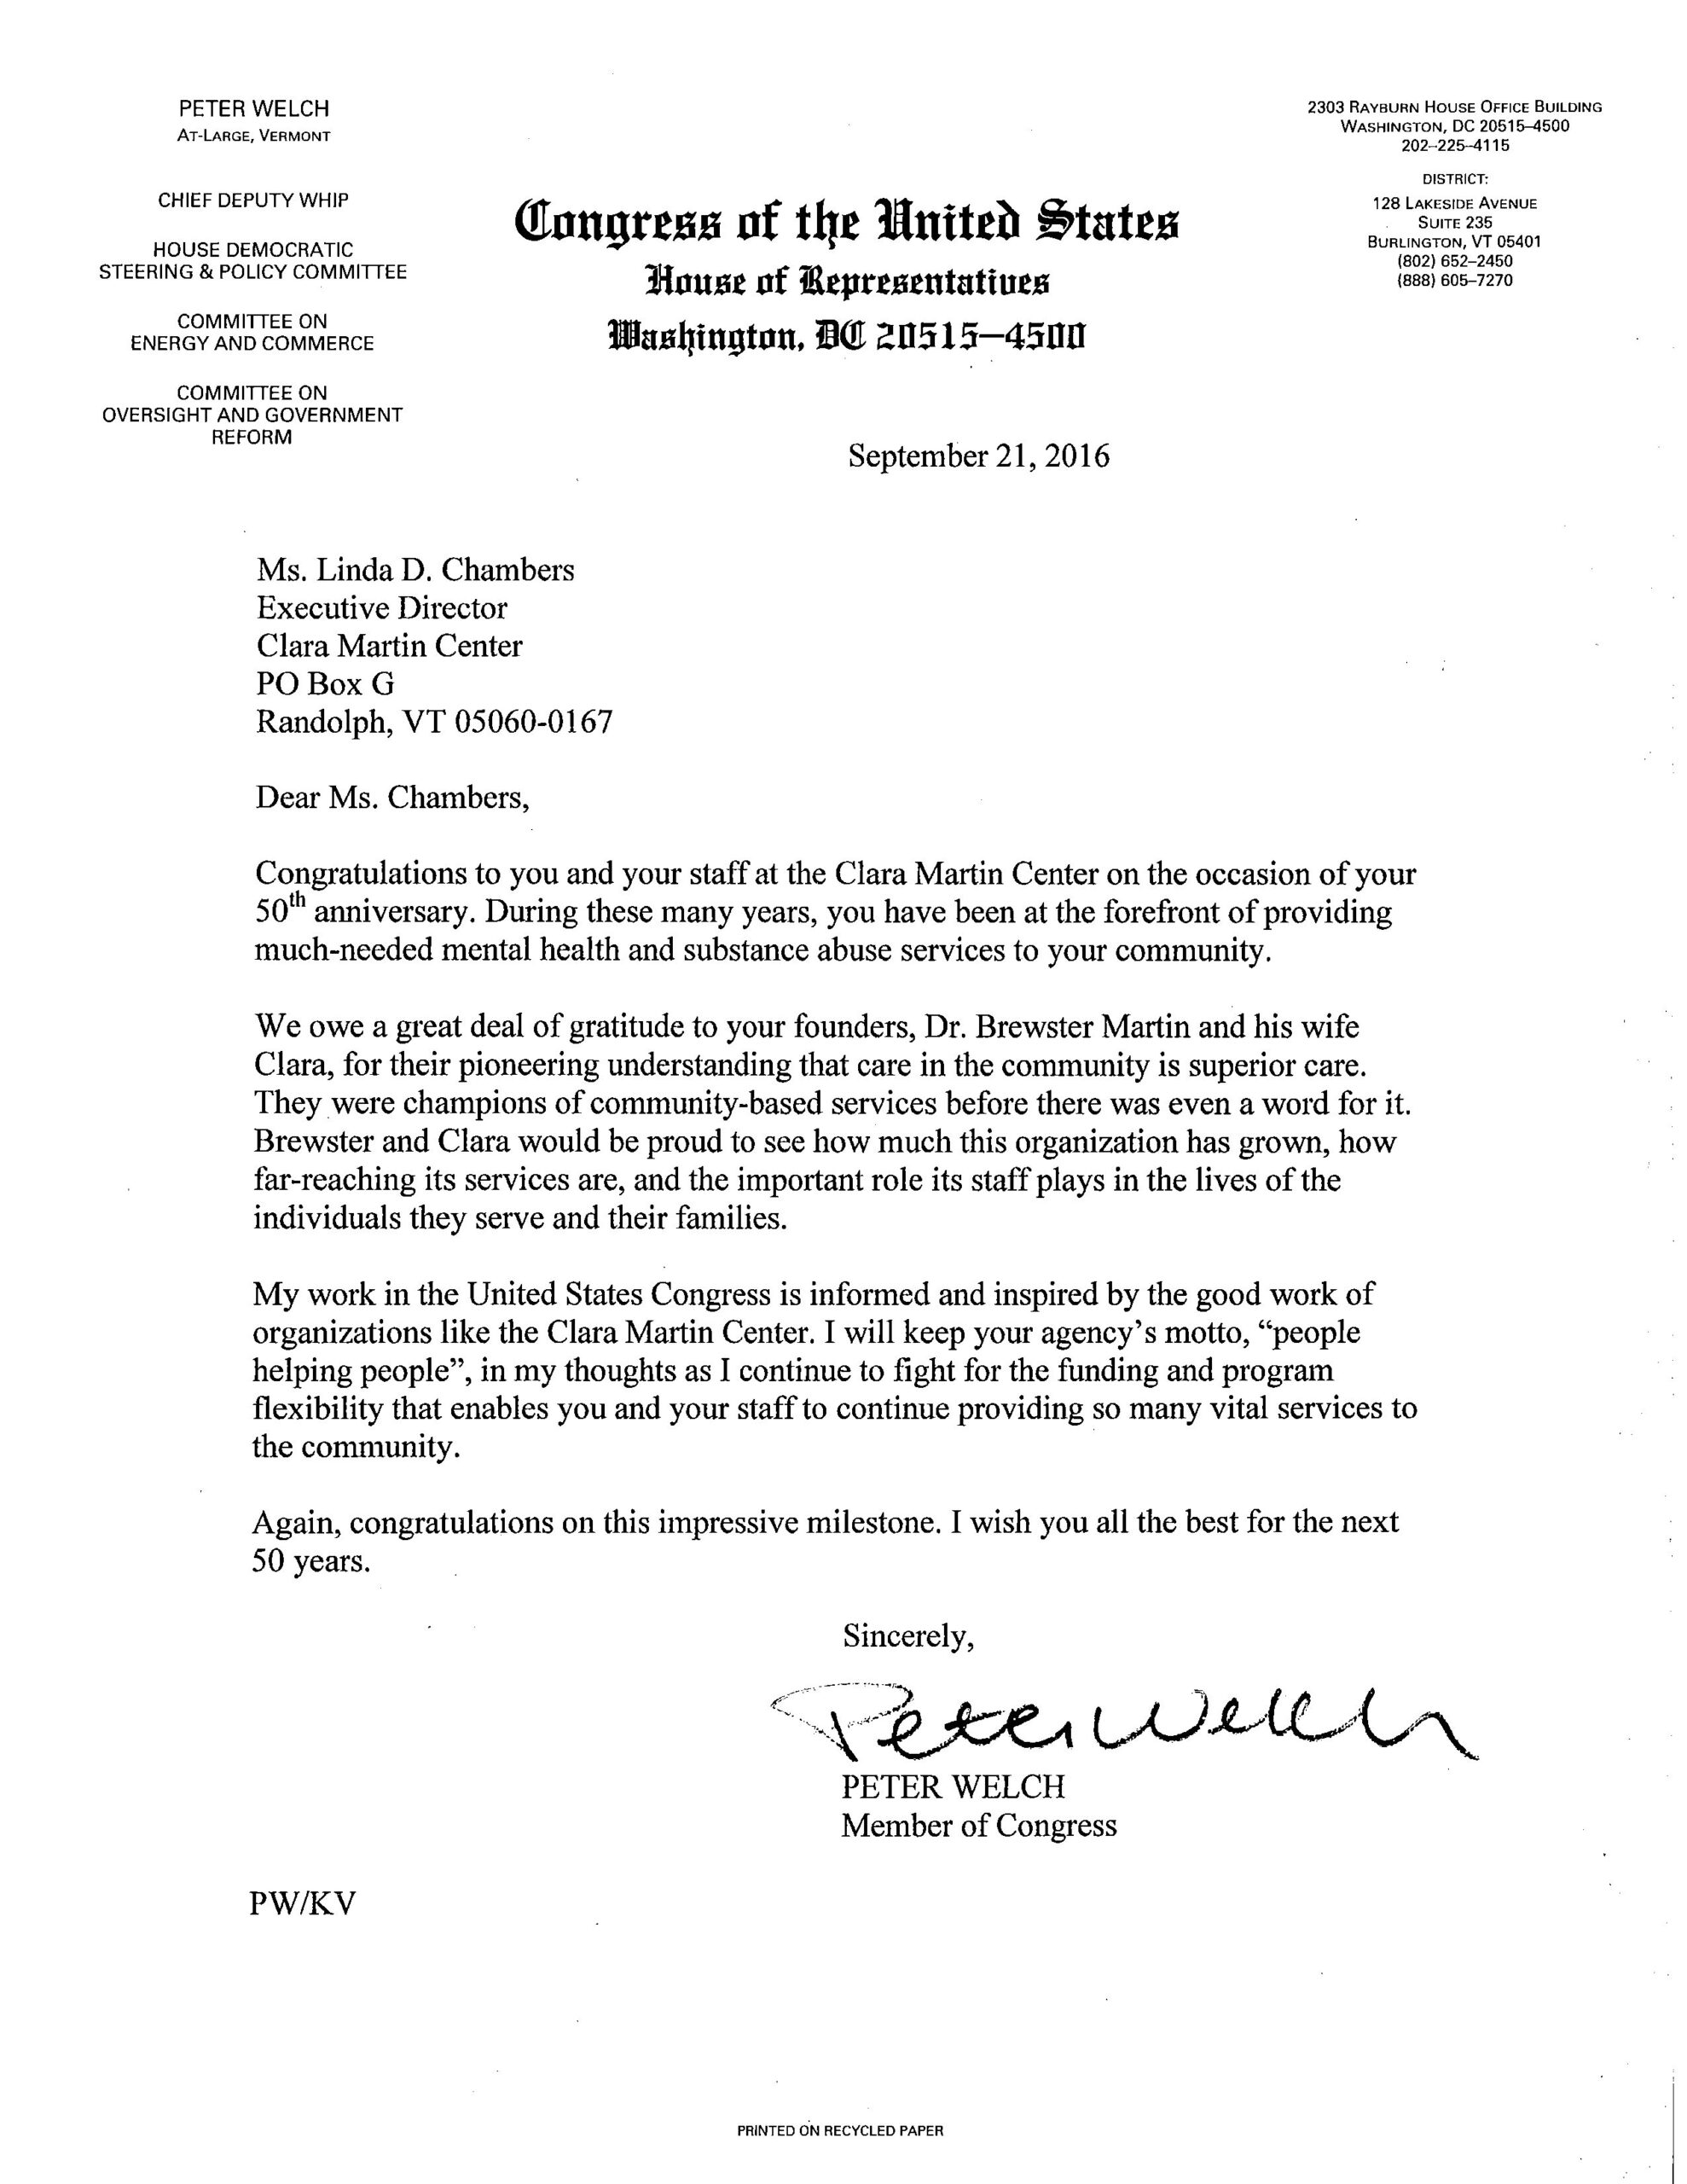 Letter from Congressman Peter Welch to the Clara Martin Center on their 50th Anniversary